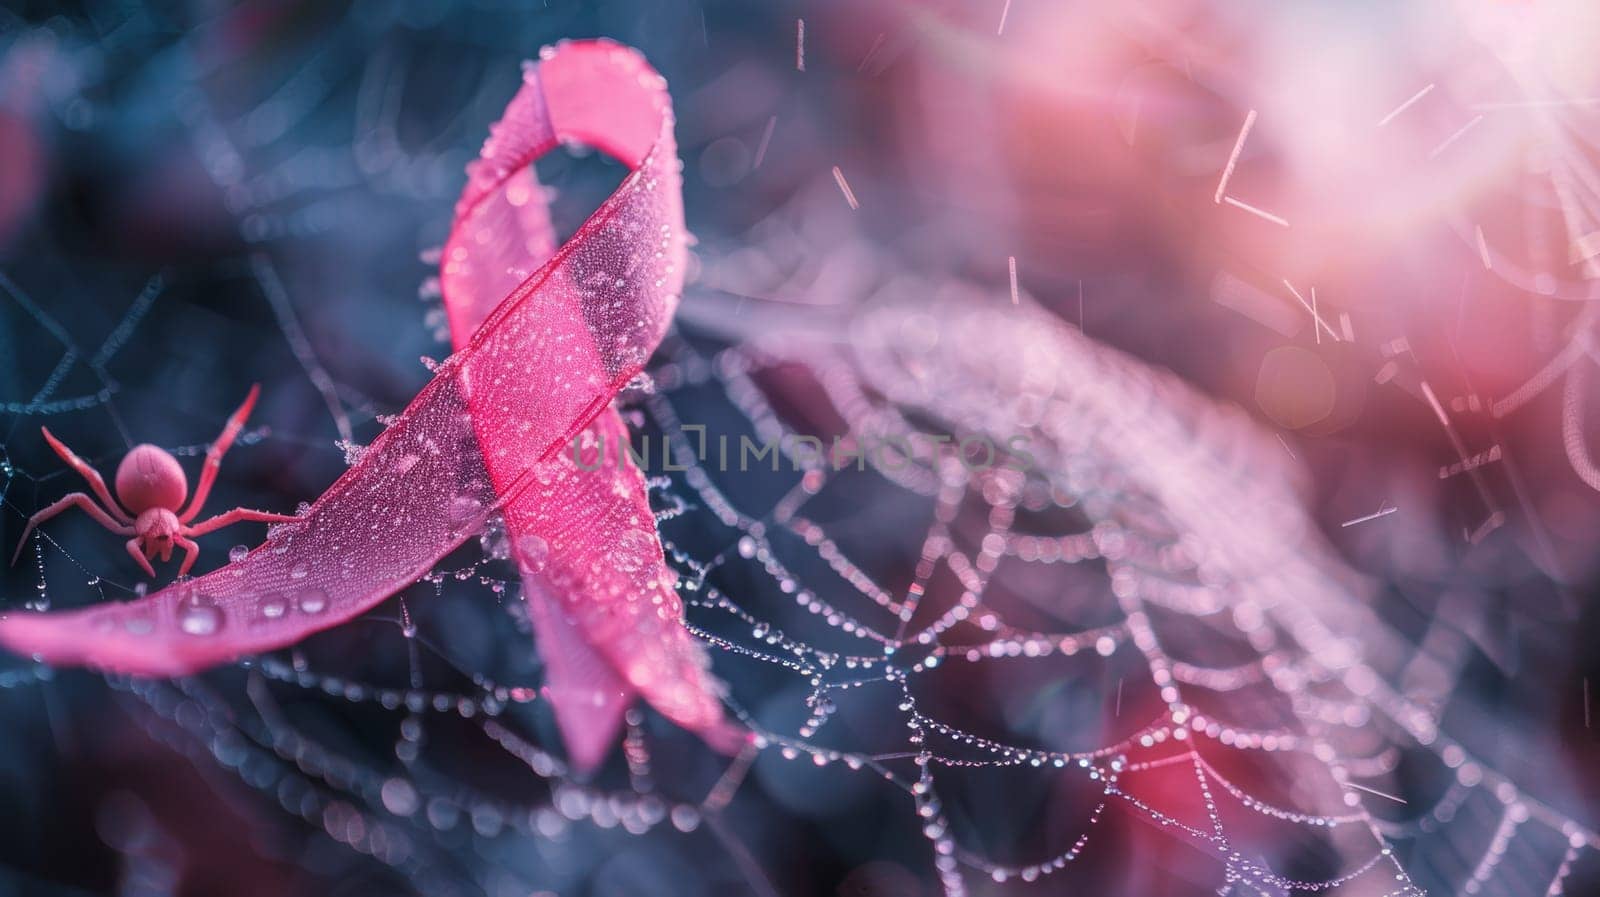 Pink Ribbon with Dew Drops on Spider Web for Breast Cancer Awareness by ailike